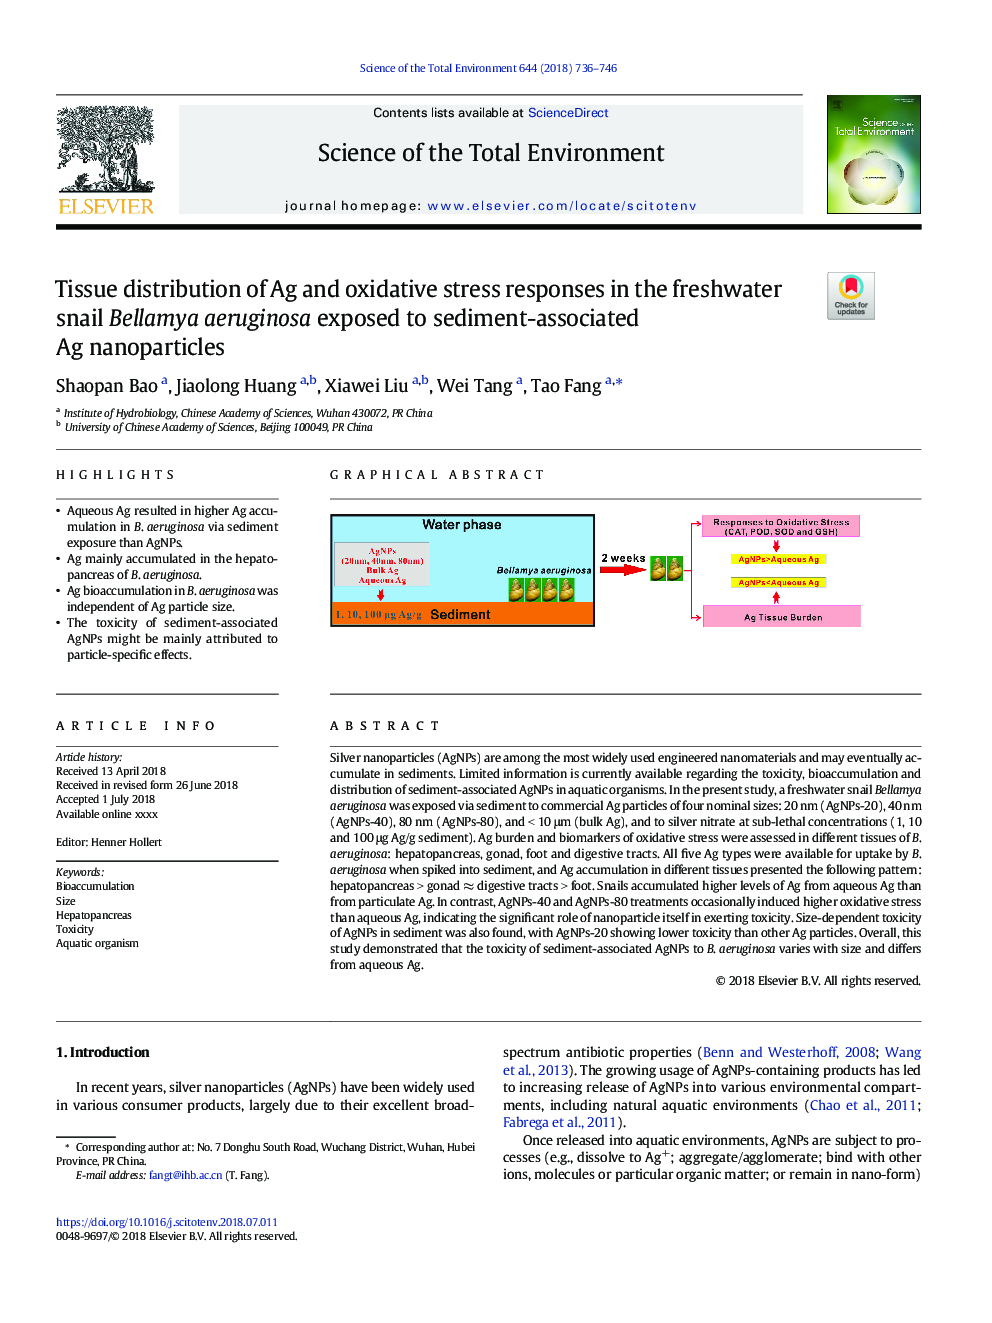 Tissue distribution of Ag and oxidative stress responses in the freshwater snail Bellamya aeruginosa exposed to sediment-associated Ag nanoparticles